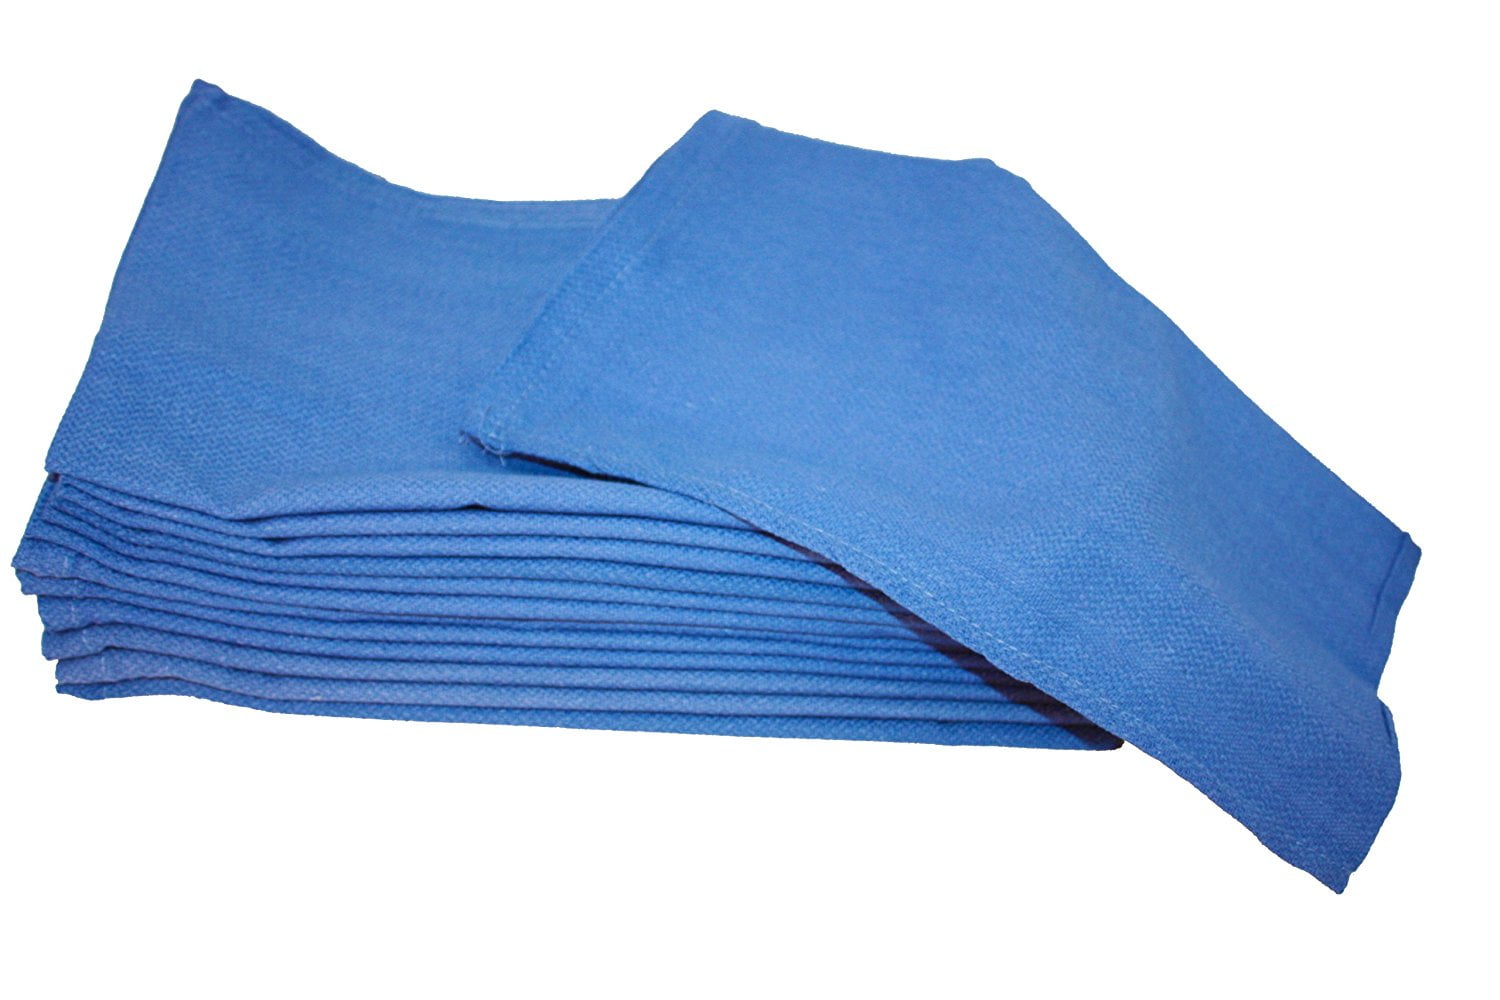 75 premium blue huck towels glass cleaning janitorial lintless surgical detail 